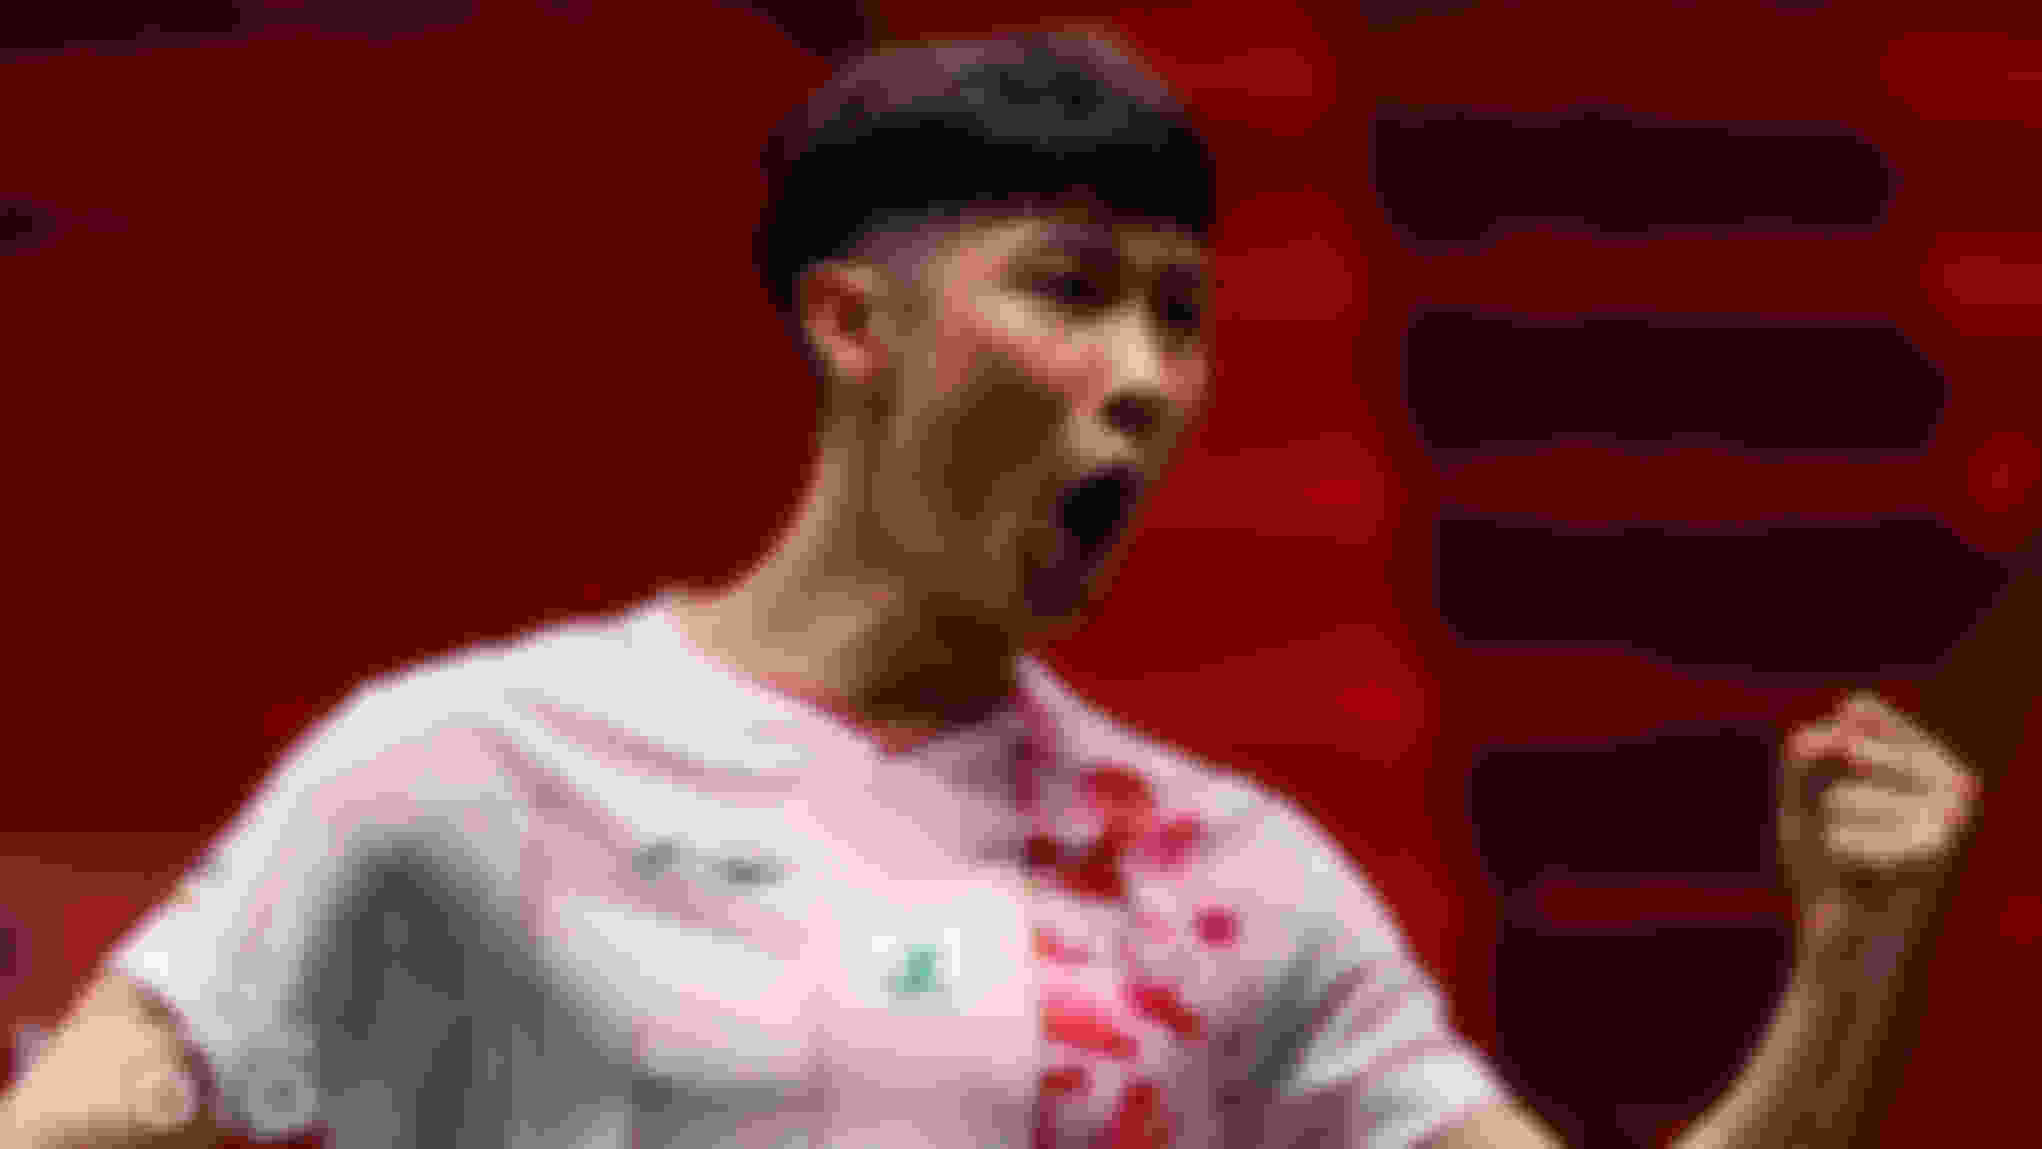 Lovin' it: Loh Kean Yew produced an emphatic win over the stalwart Chou Tien Chen to kick off his Tour Finals campaign.